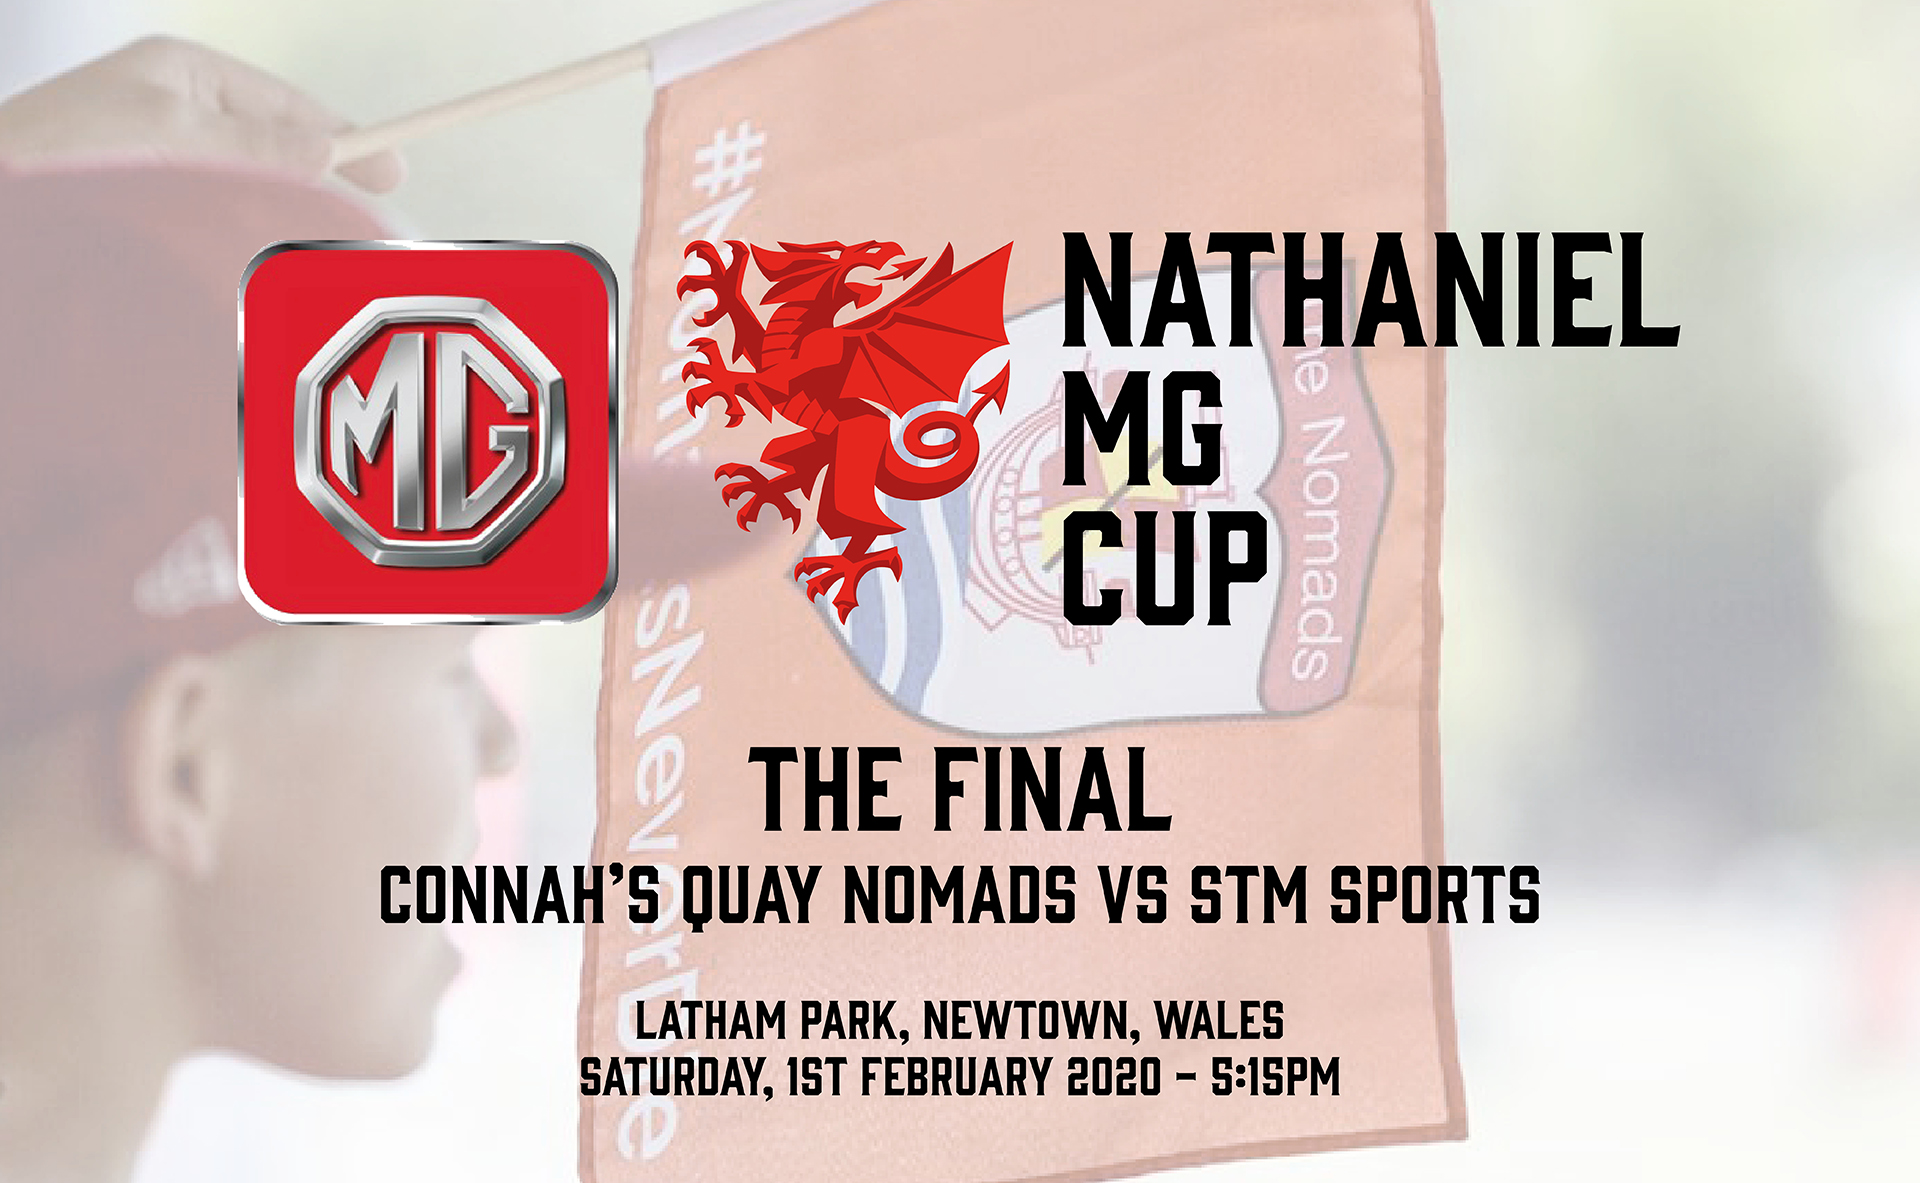 Connah's Quay Nomads vs STM Sports - 2020 Nathaniel MG Cup Final